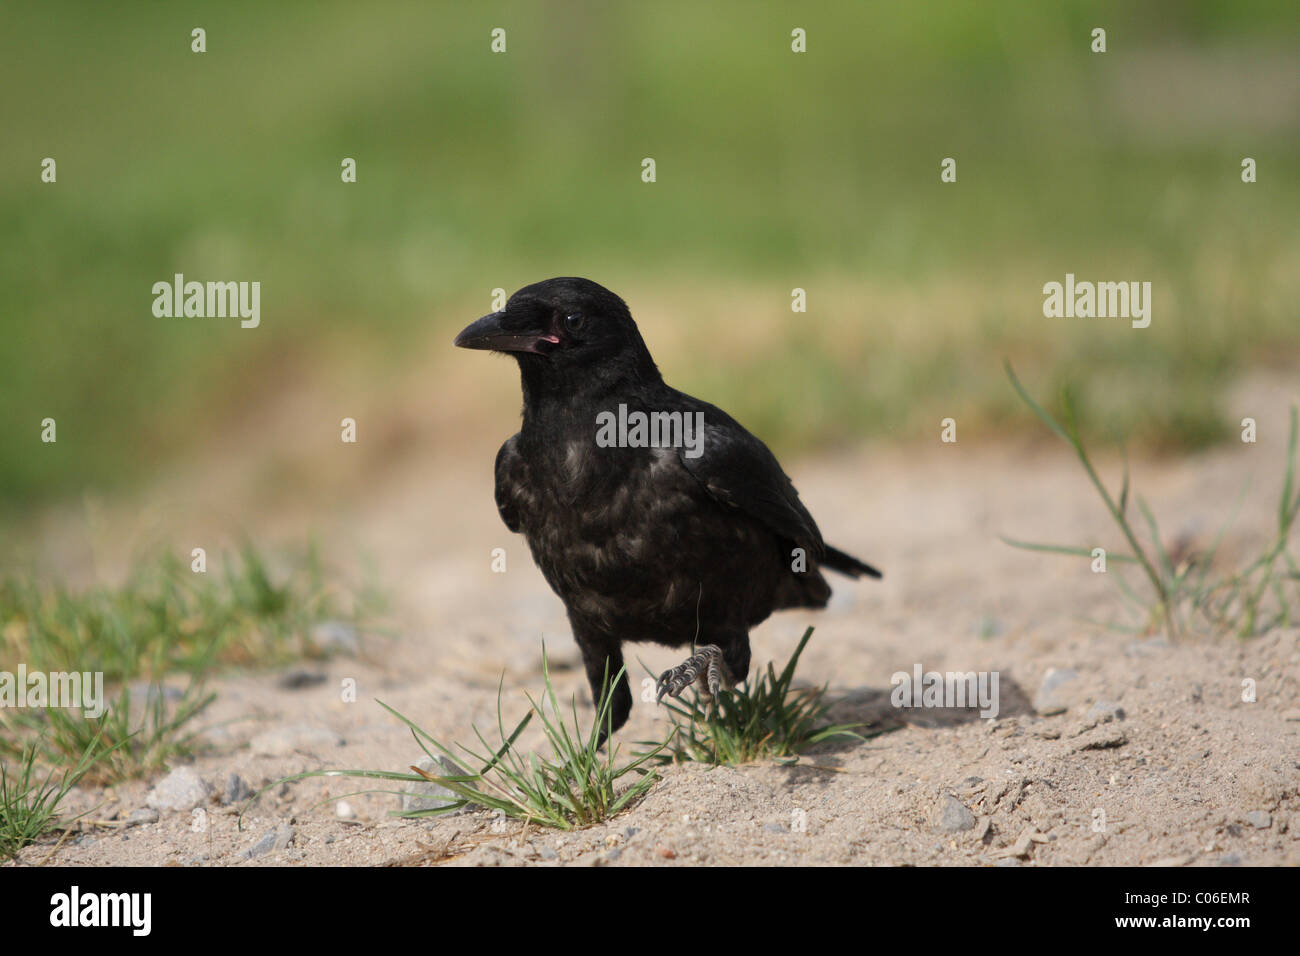 Carrion crow Foto Stock